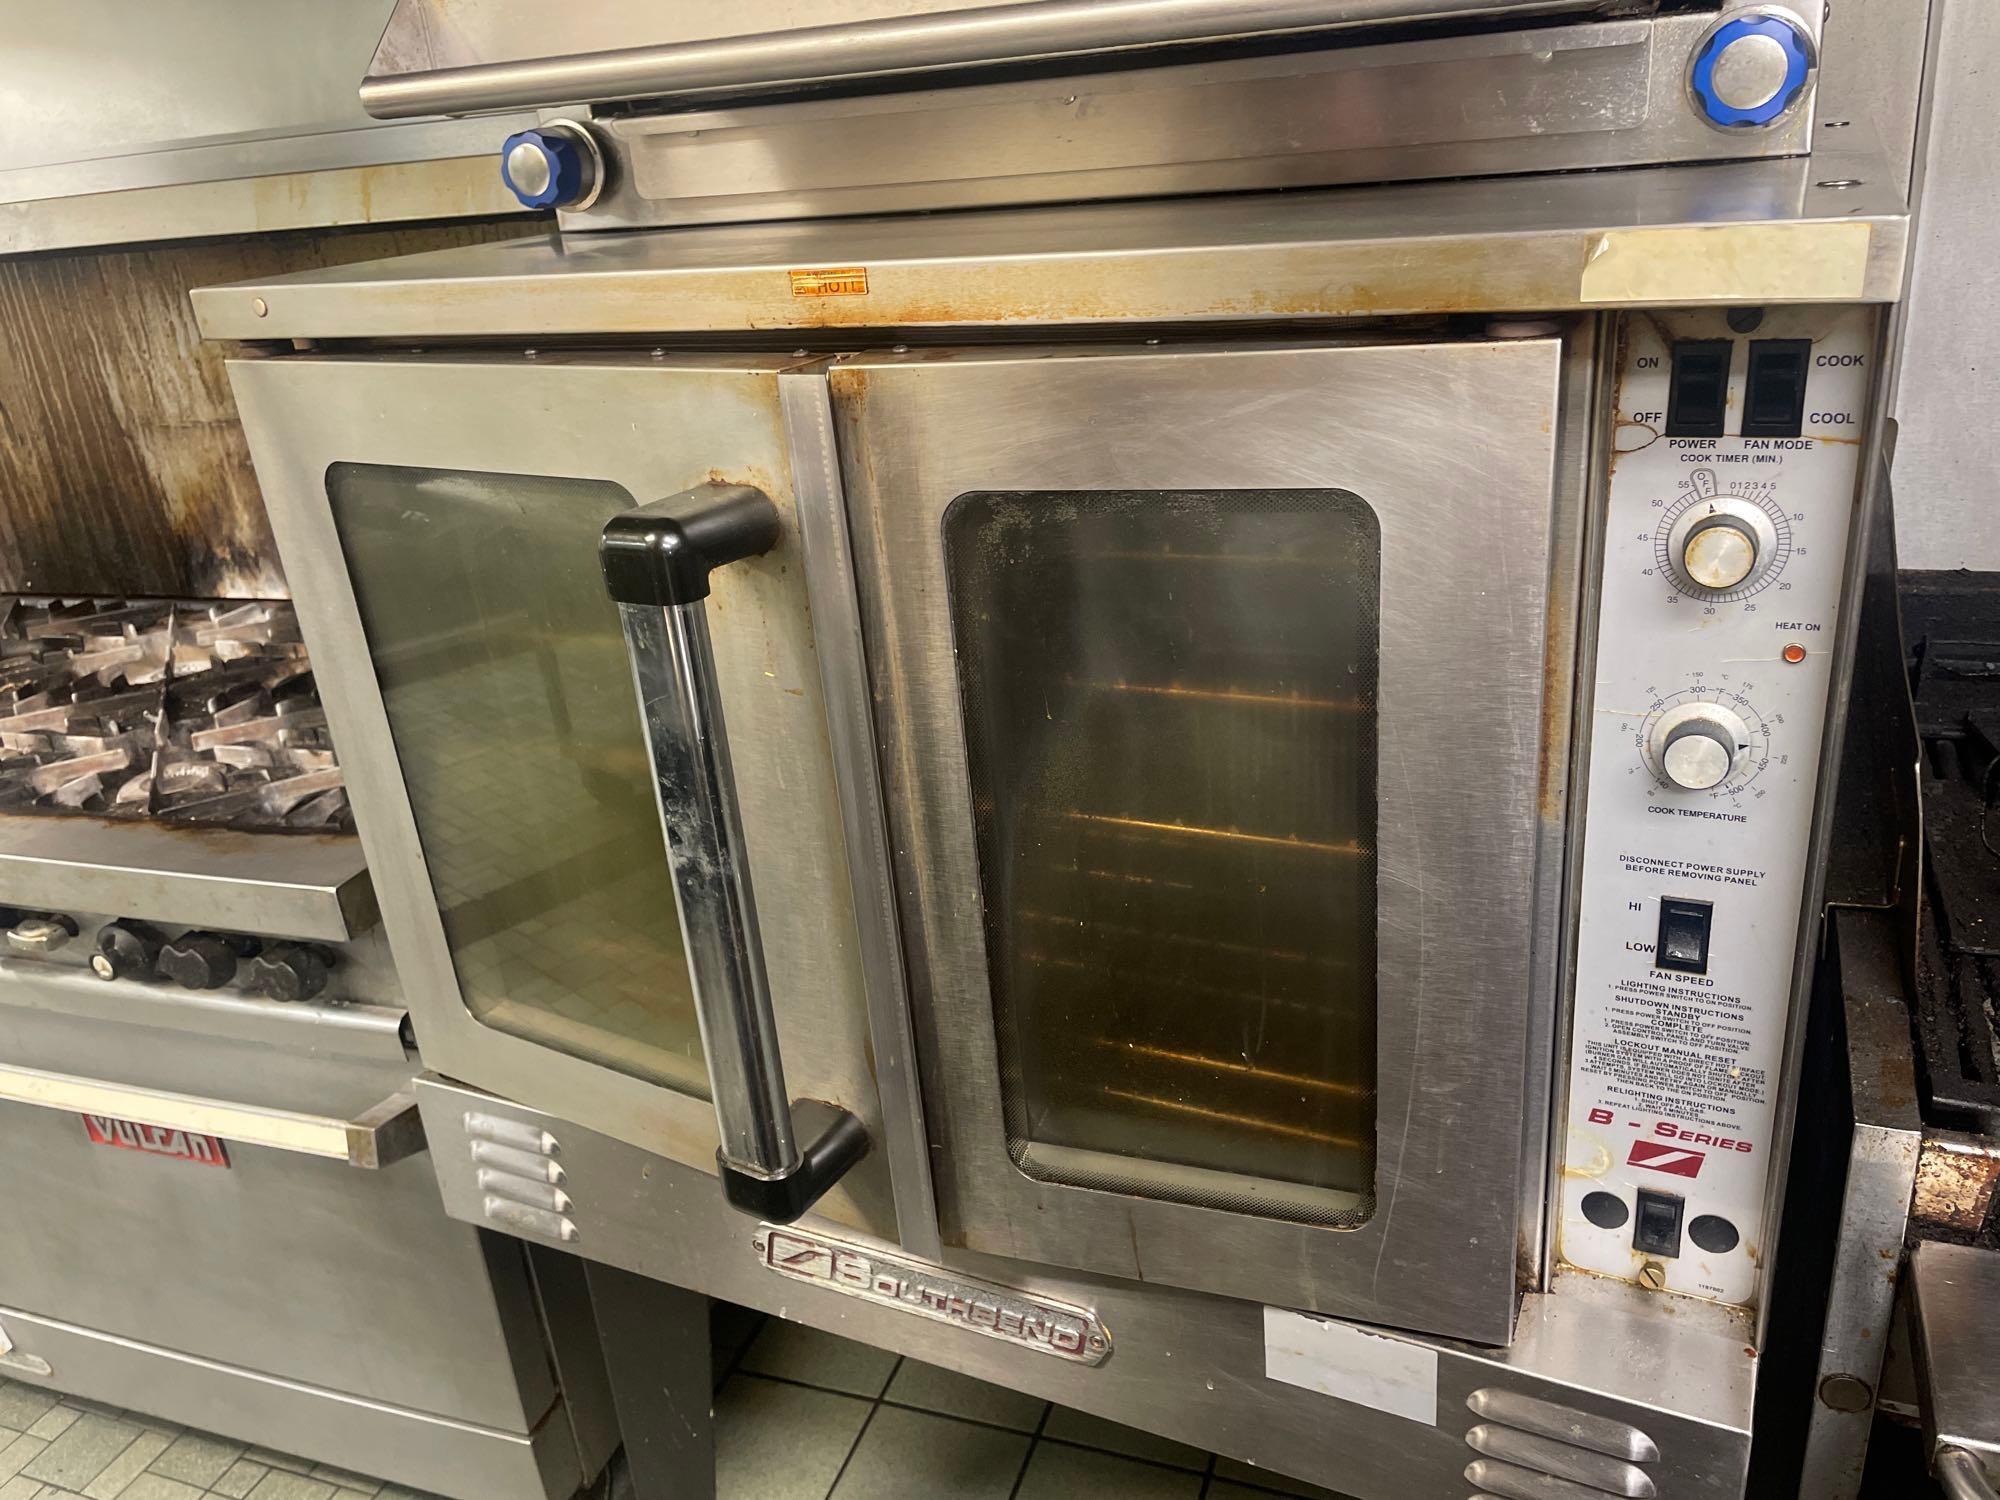 K- Southbend Gas Convection Oven